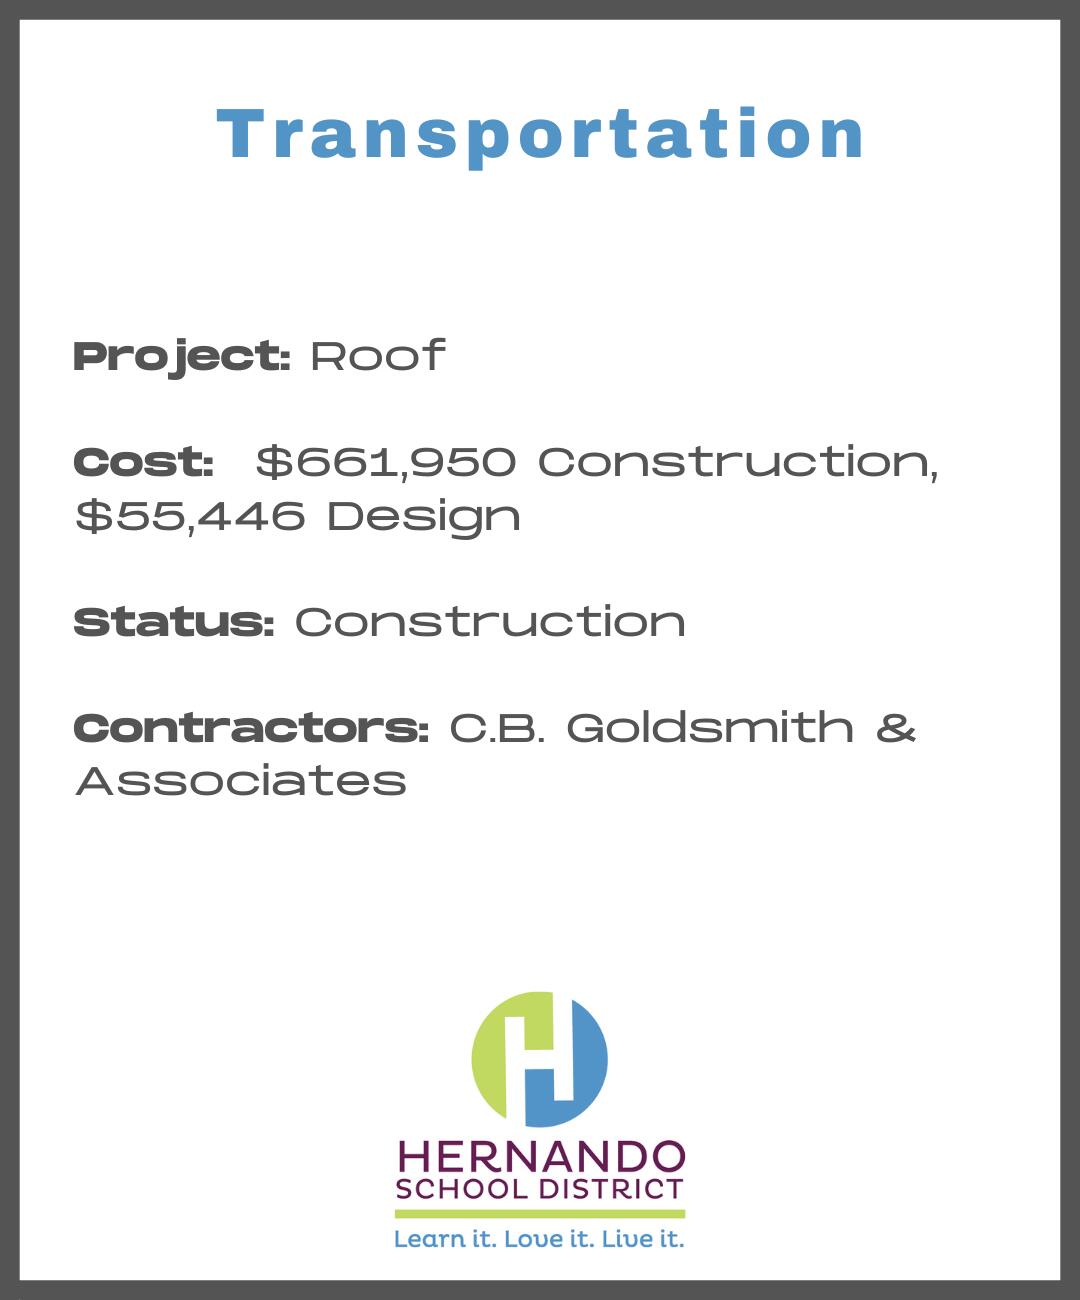 Transportation Roofing graphic